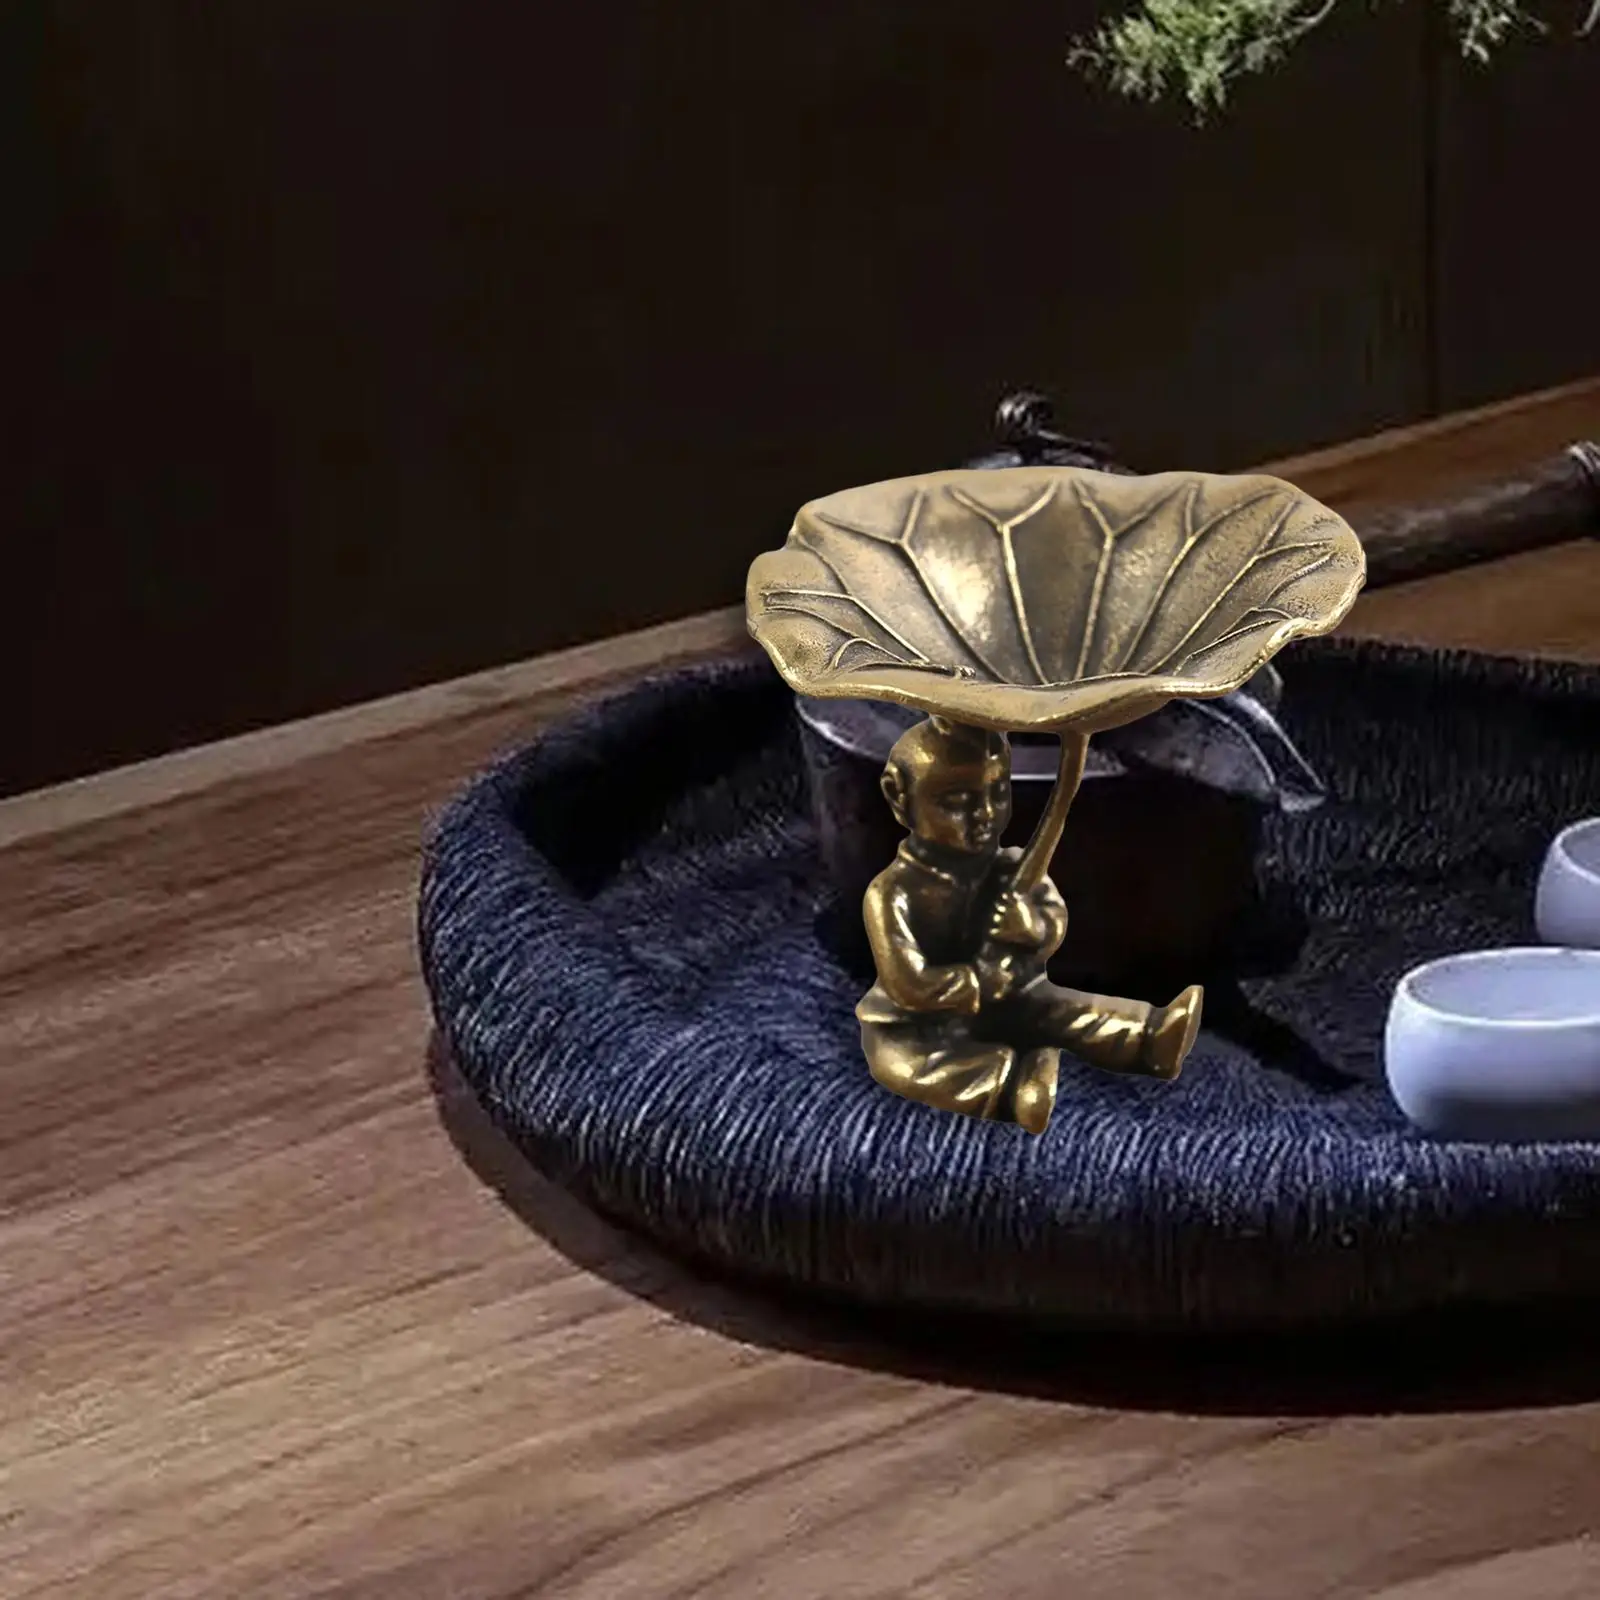 Brass Incense Holder Brass Decor Portable Table Figurine Ornament Incense Stoves for Yoga Bedroom Living Room Indoor Relaxation